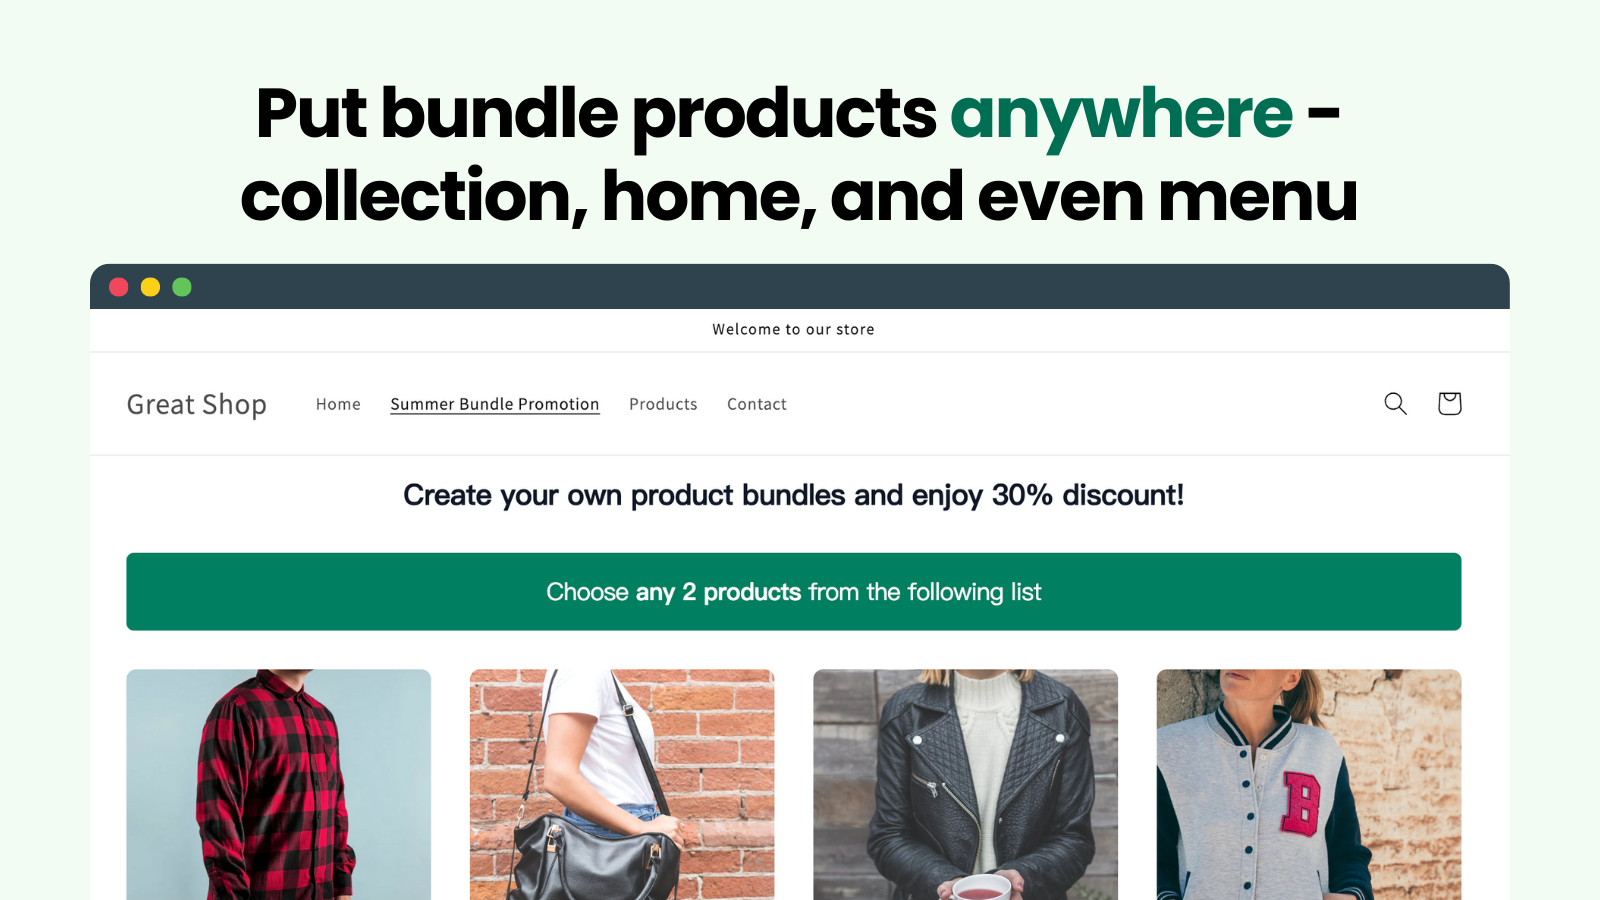 Put bundle products anywhere, in collection, home and menu